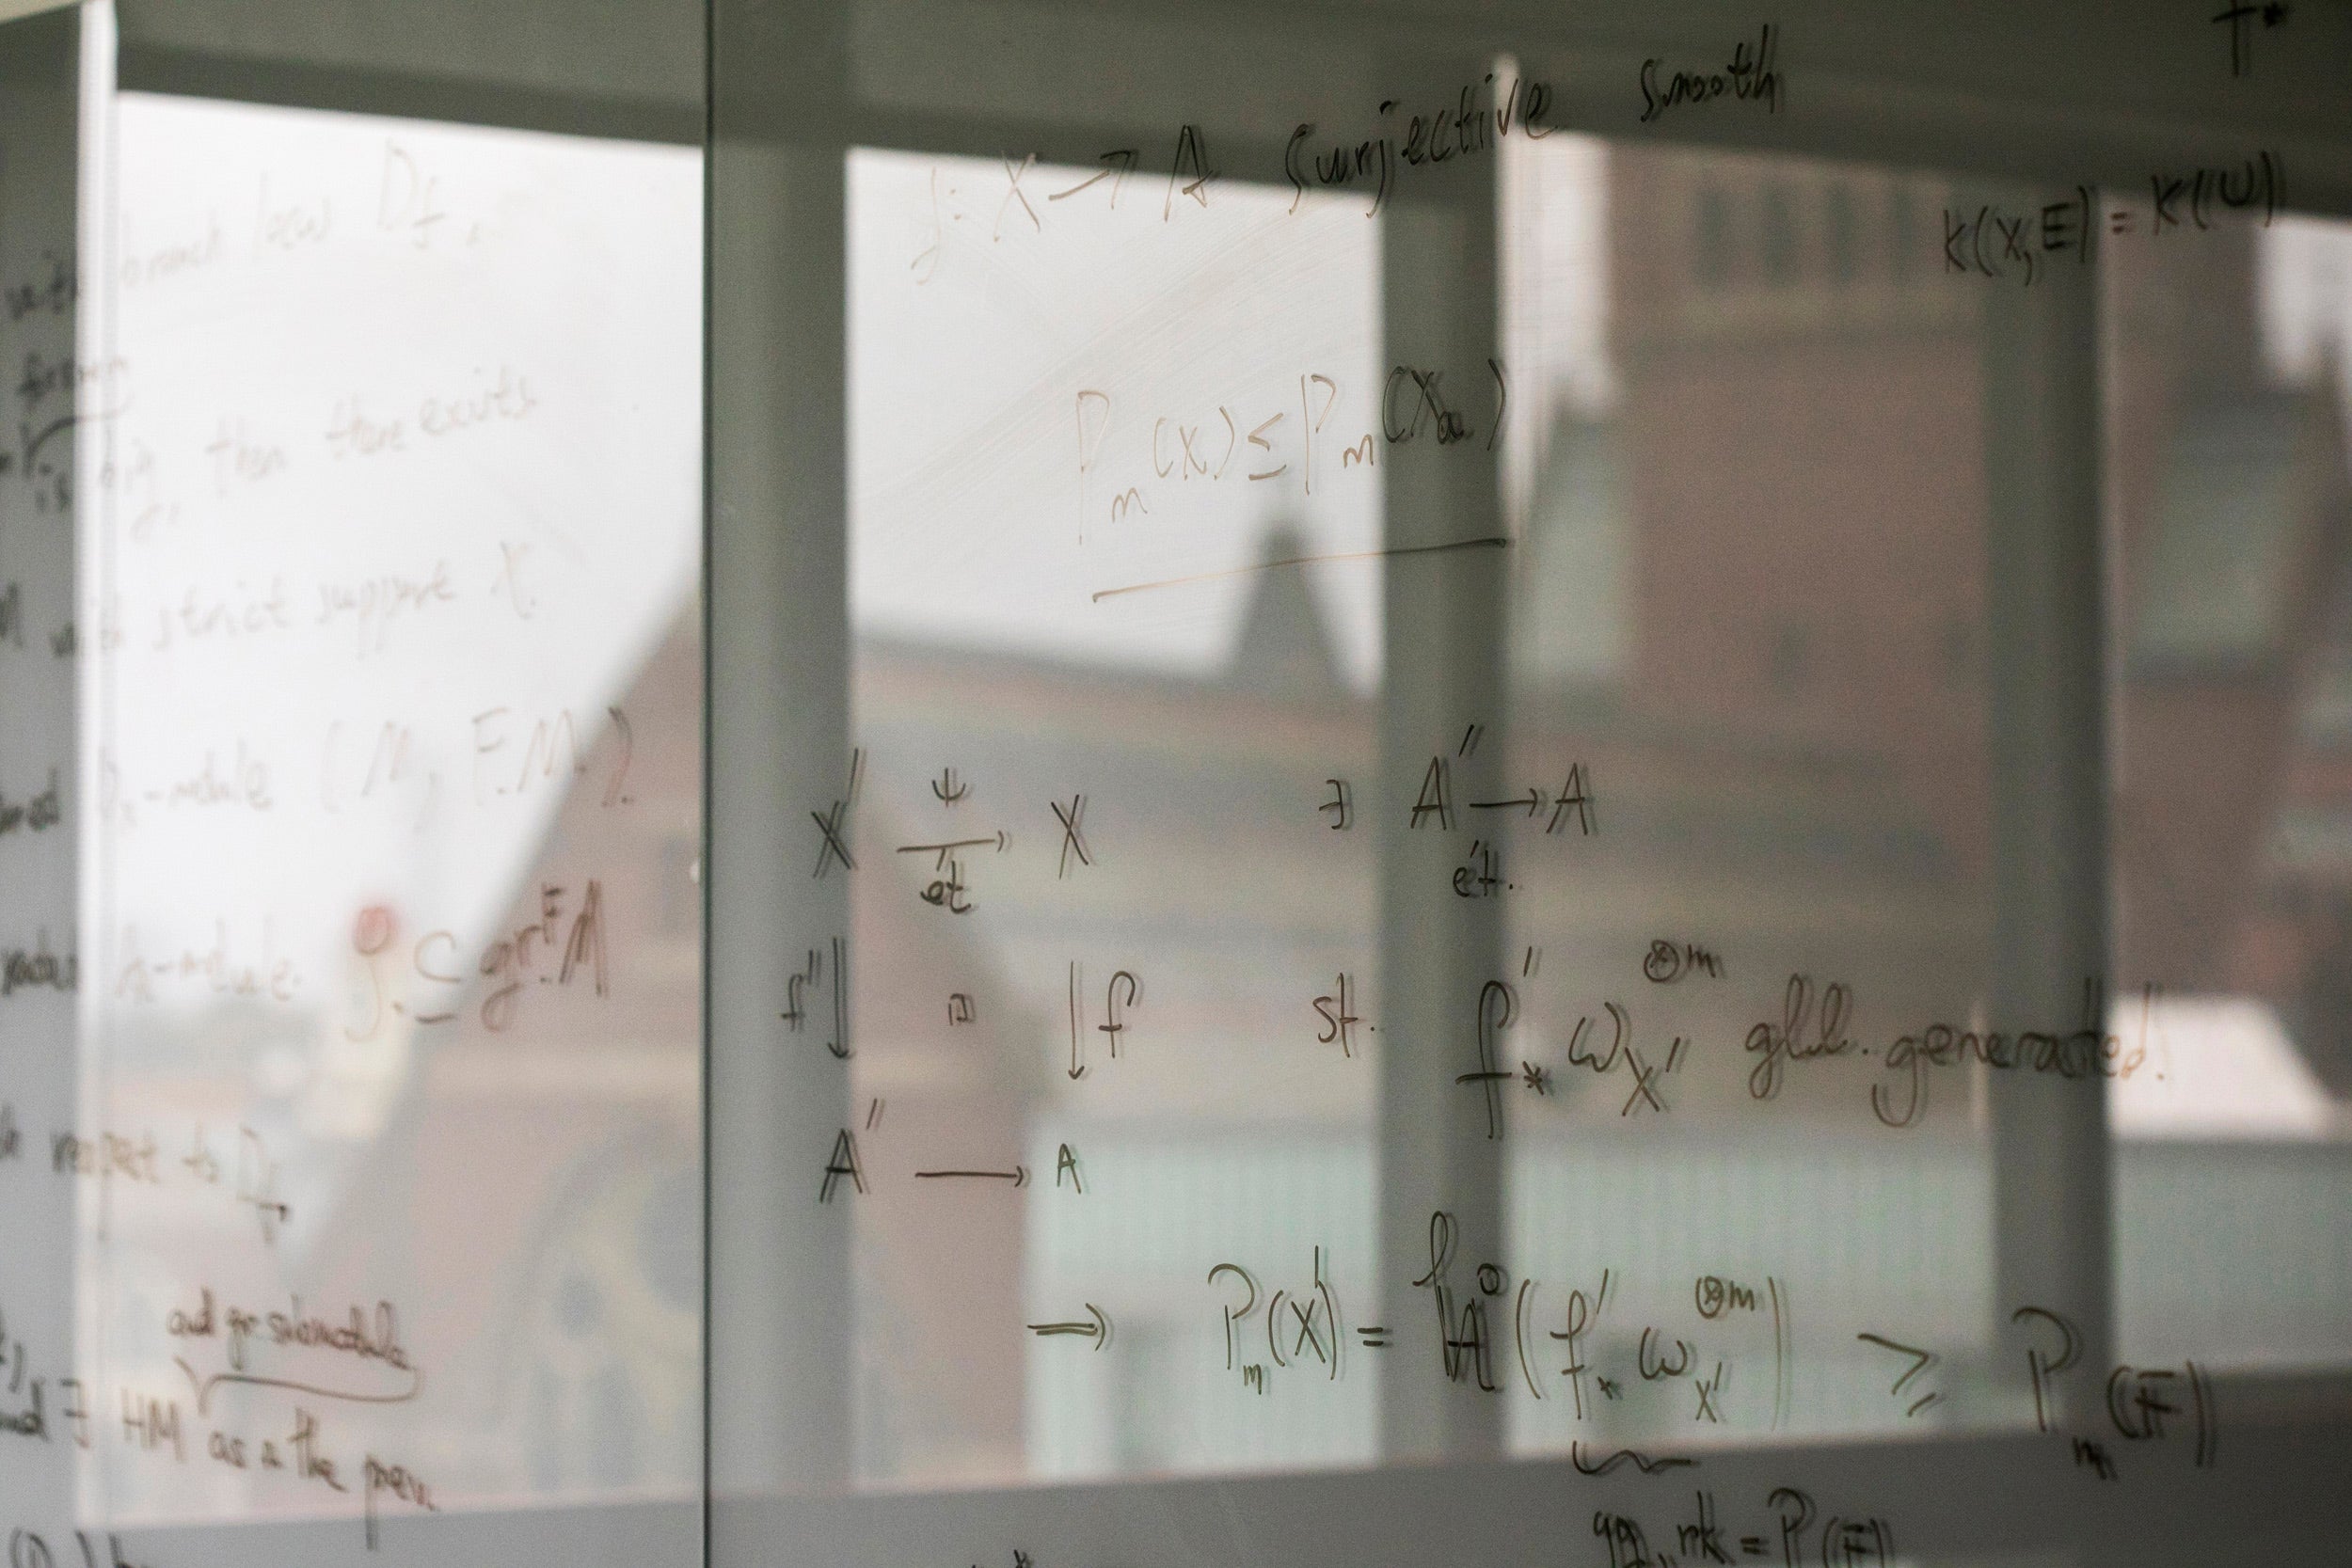 Campus reflected in glass whiteboard.